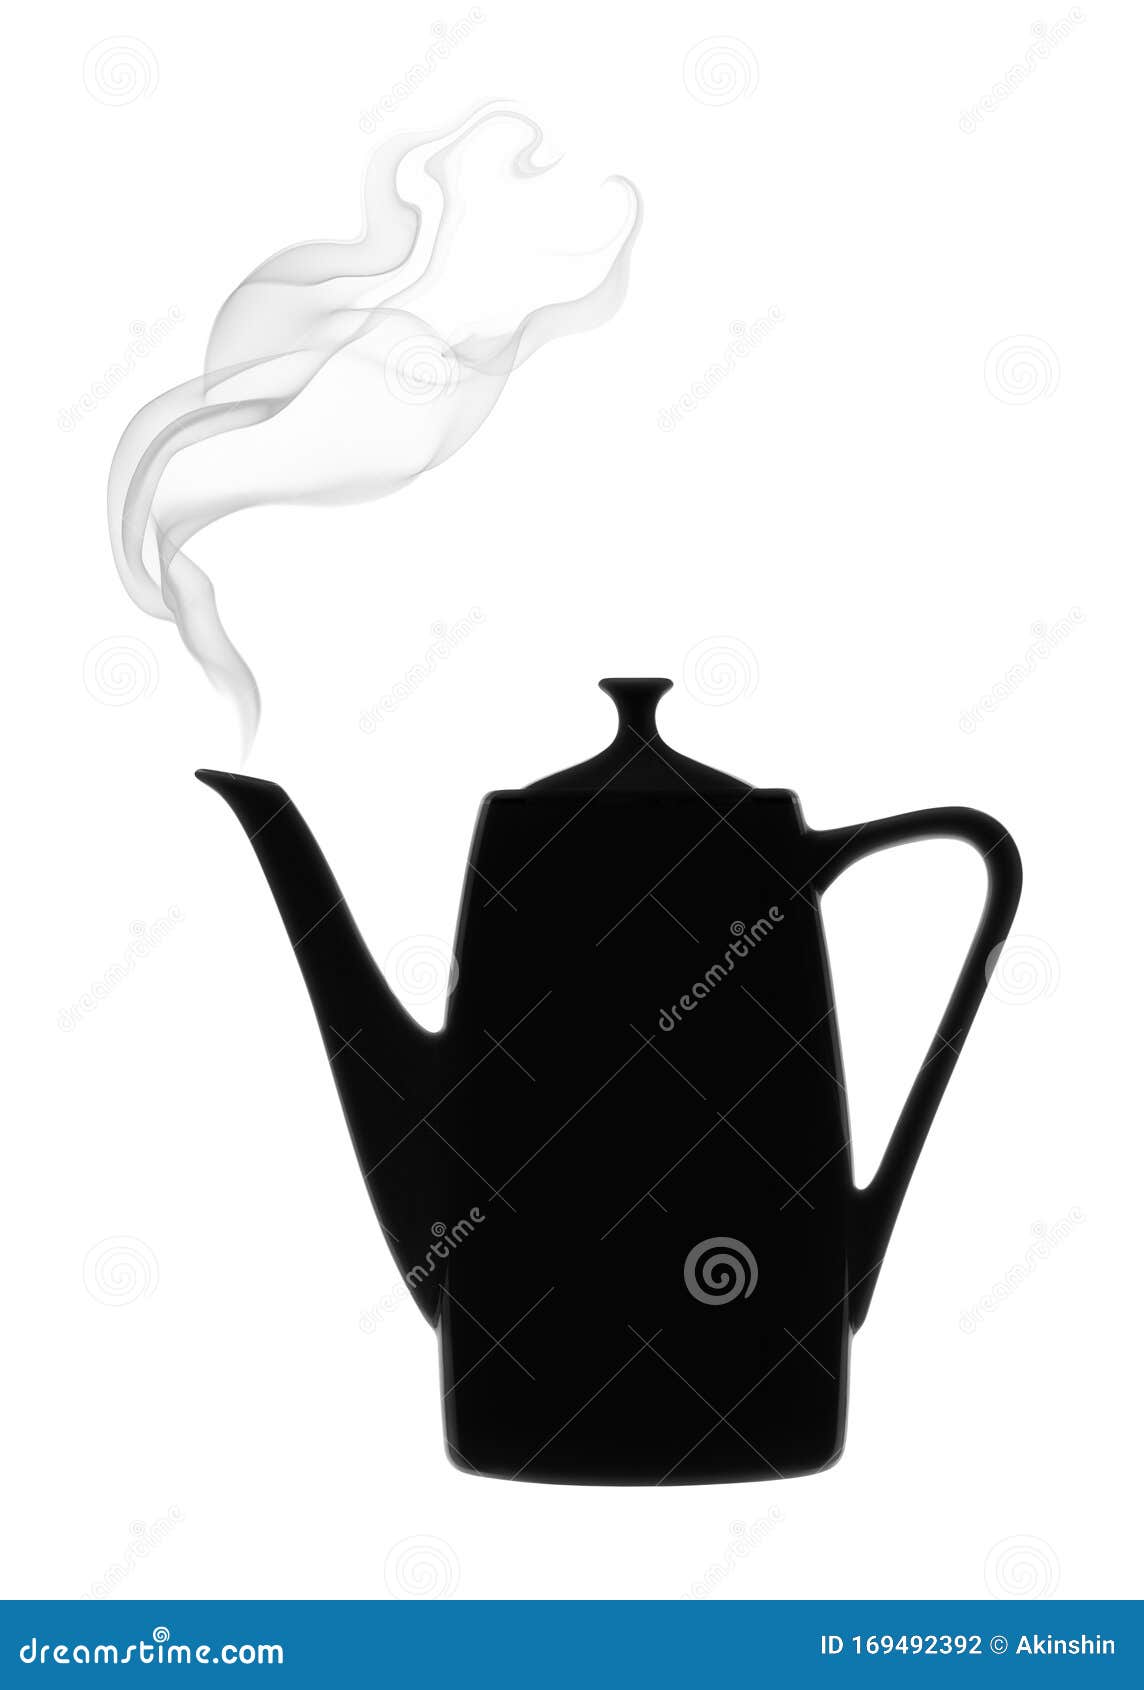 Download Silhouette Of Coffee Pot With Steam On A White Background ...